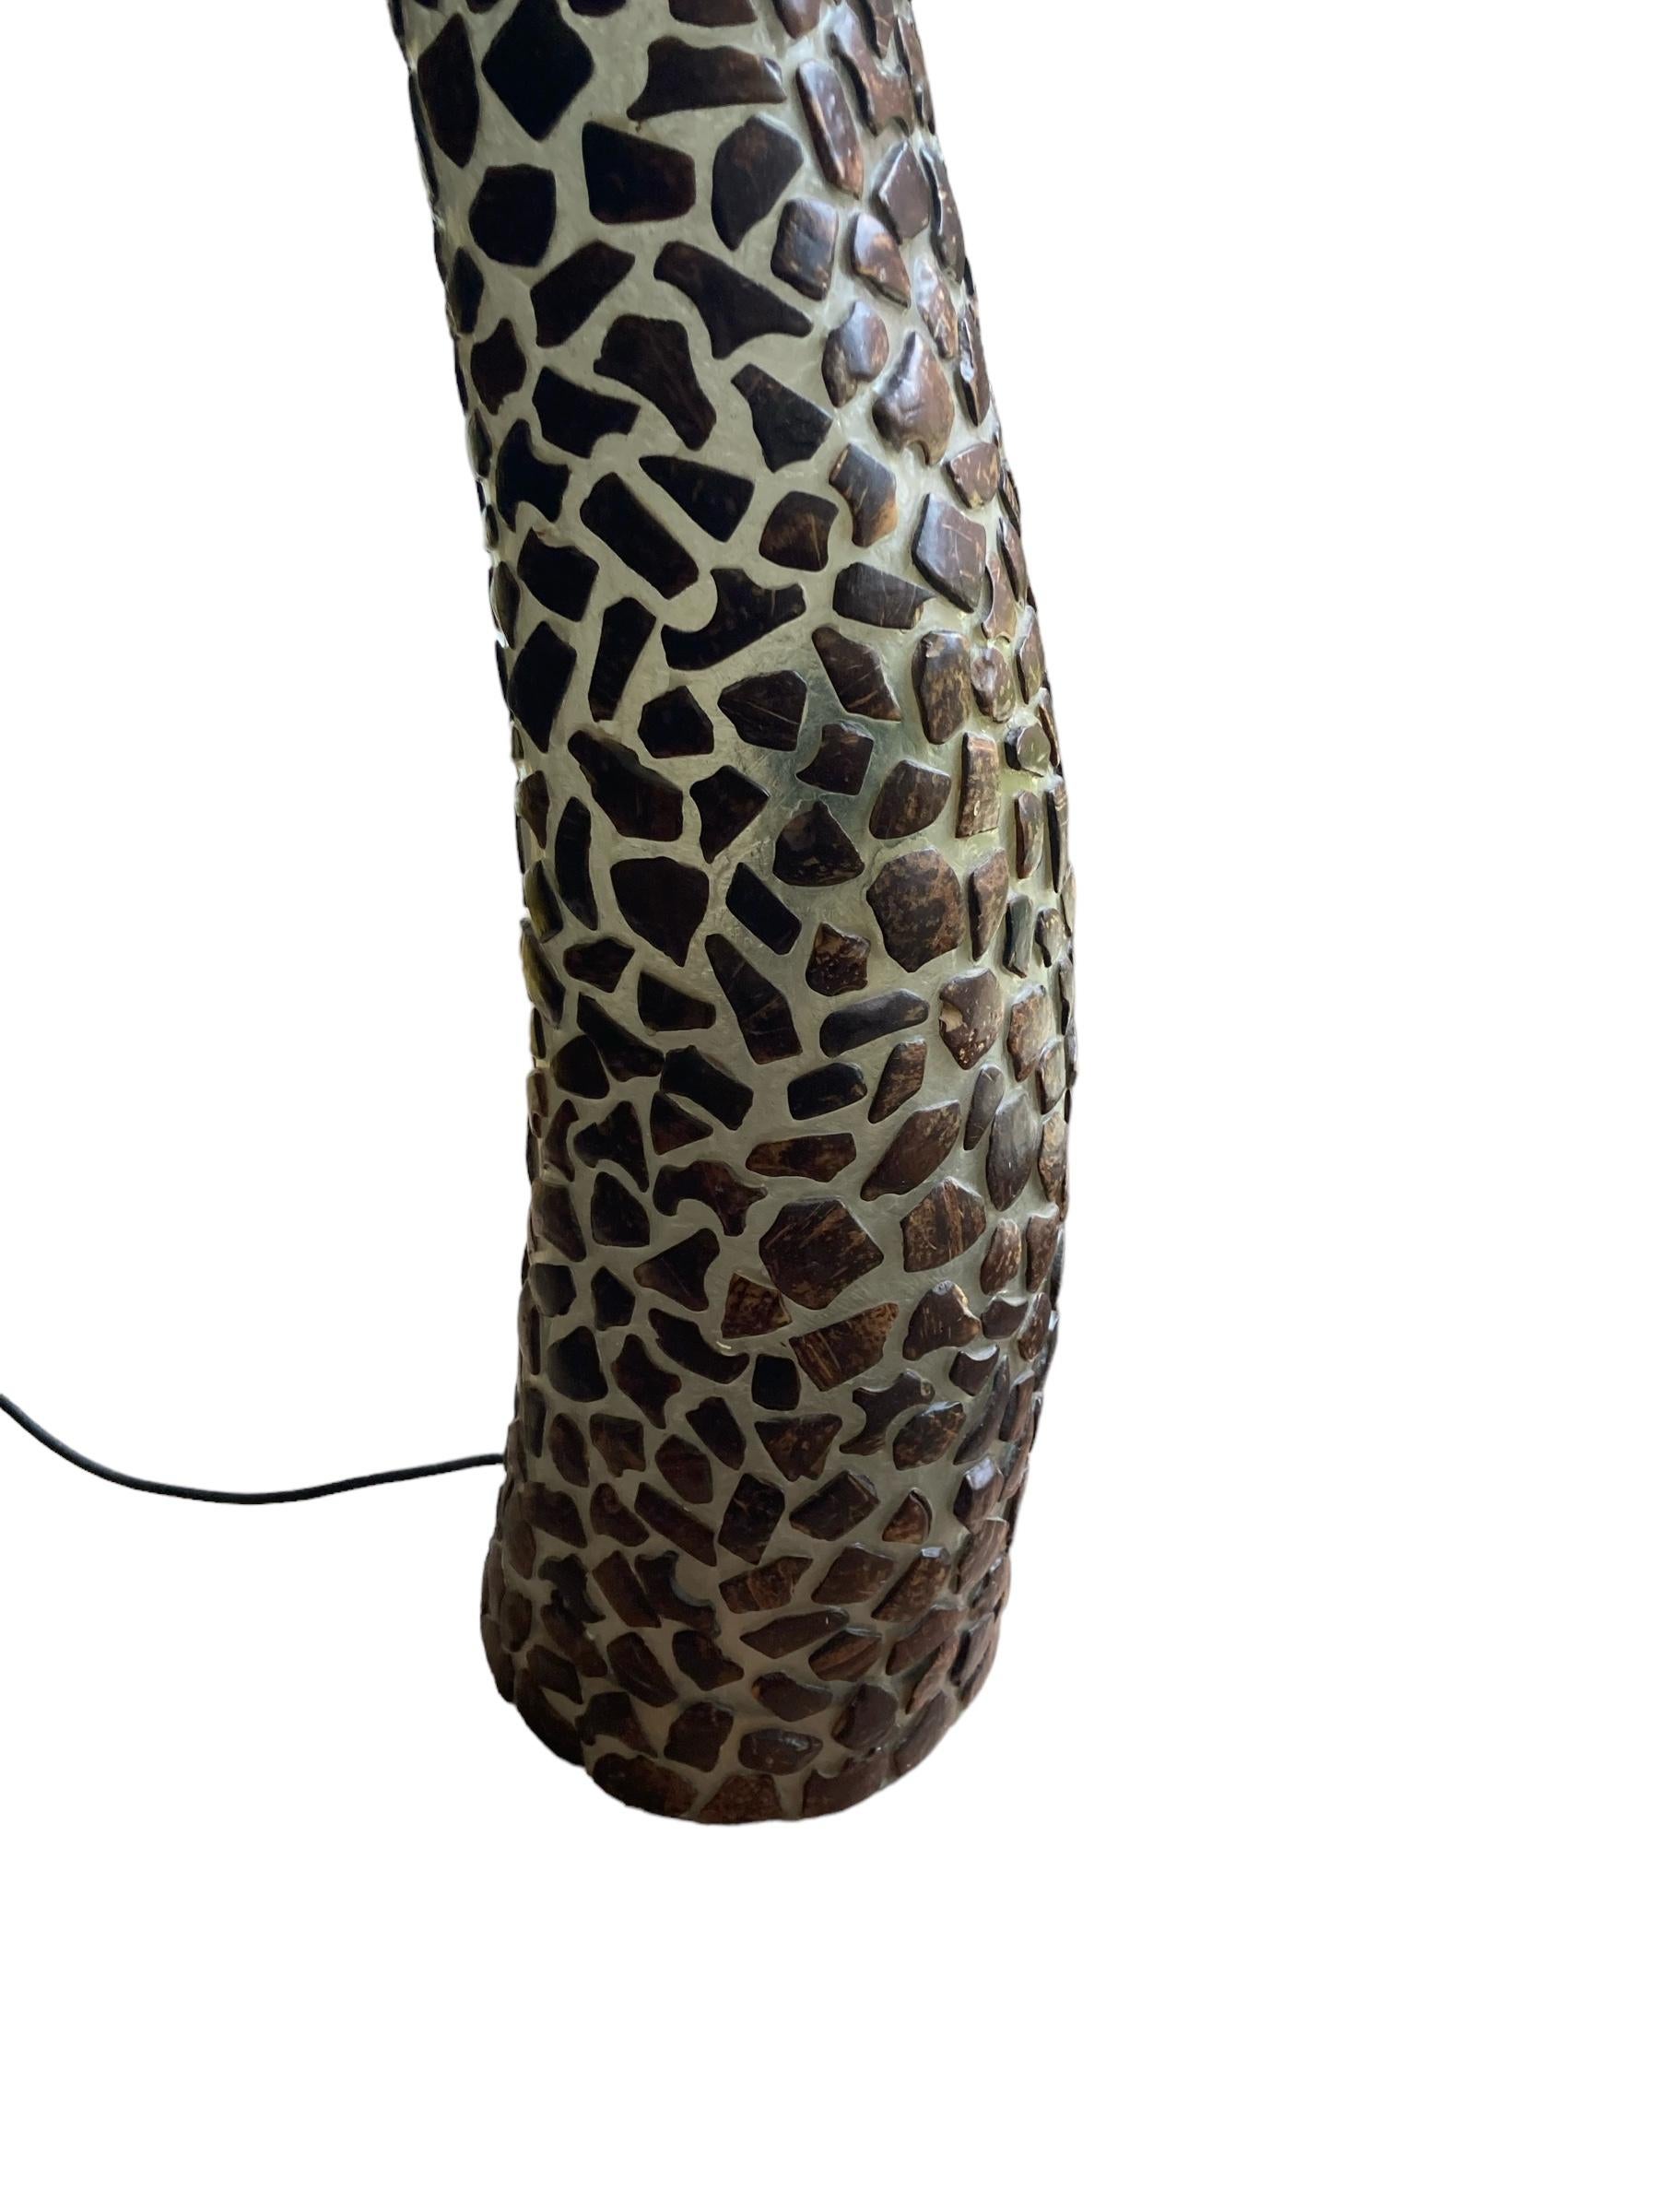 British Illuminated resin sculpture floor or table lamp For Sale